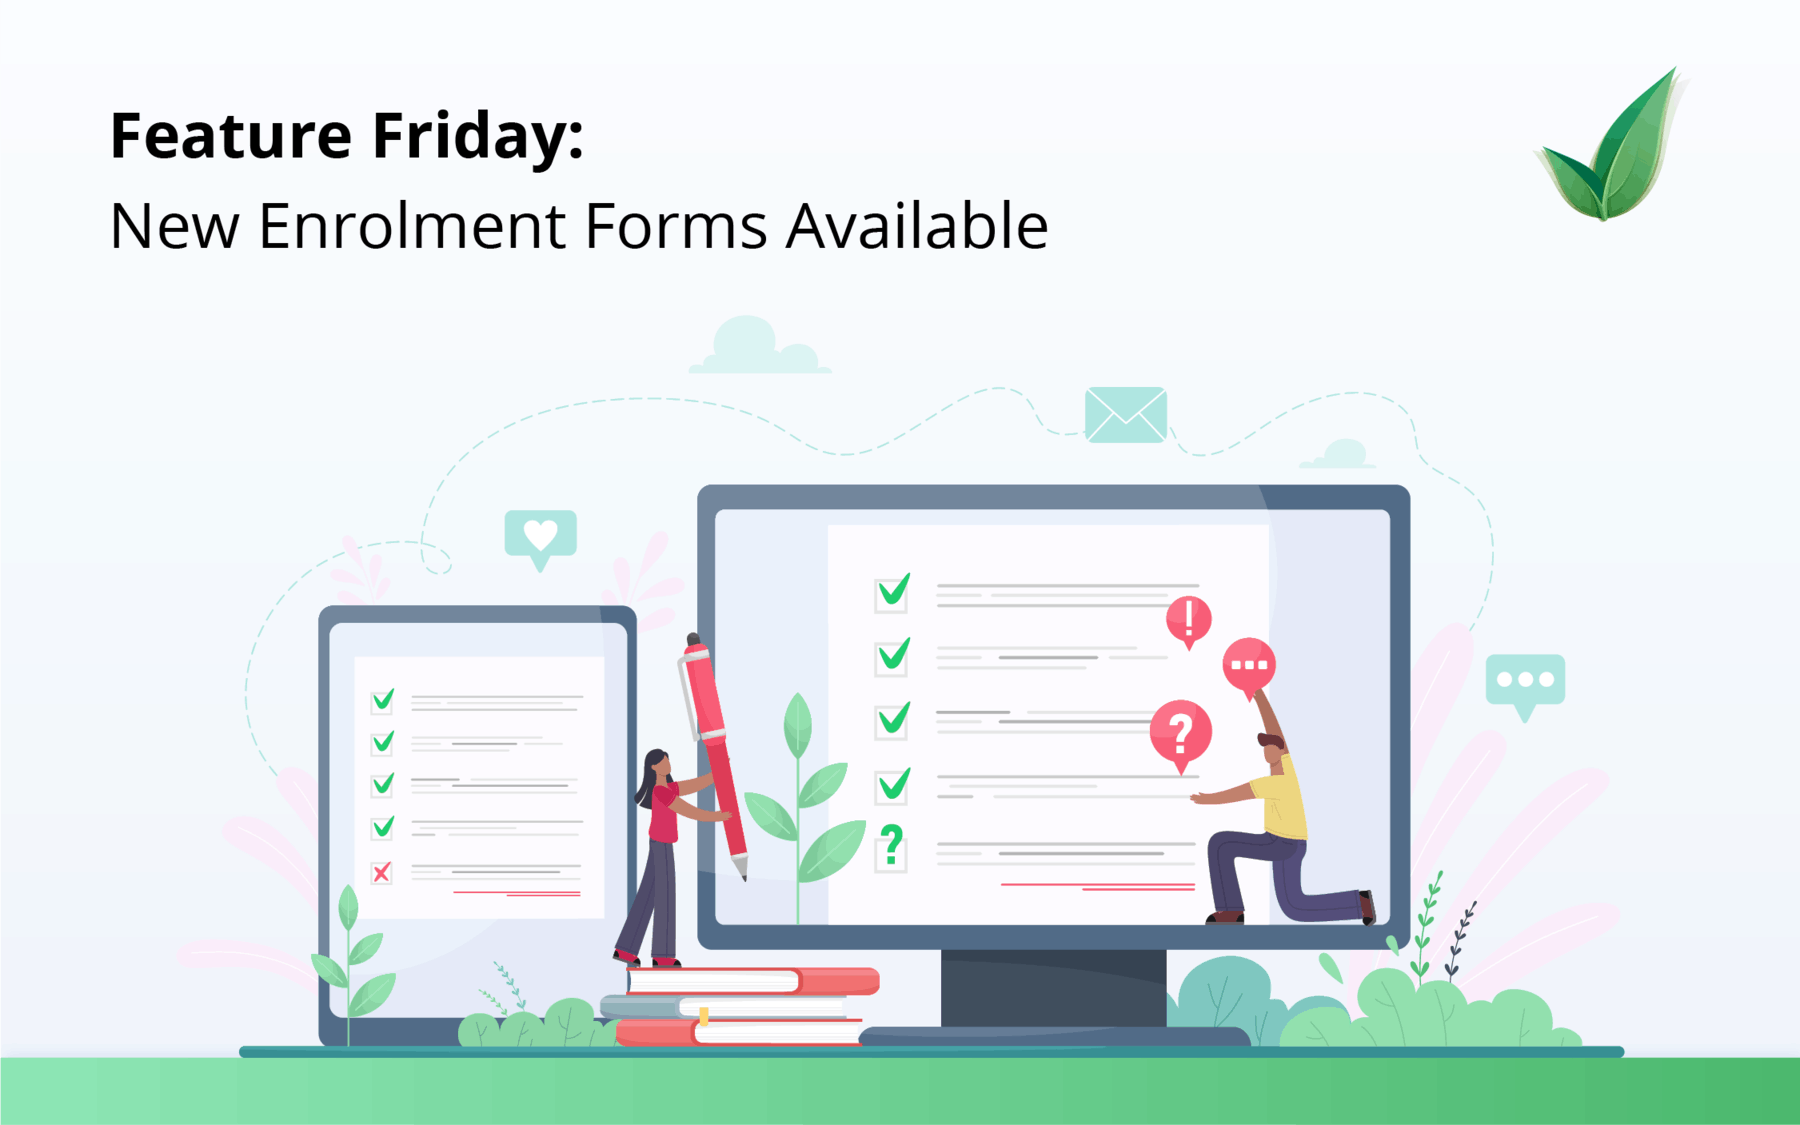 Feature Friday: New Enrolment Forms Available